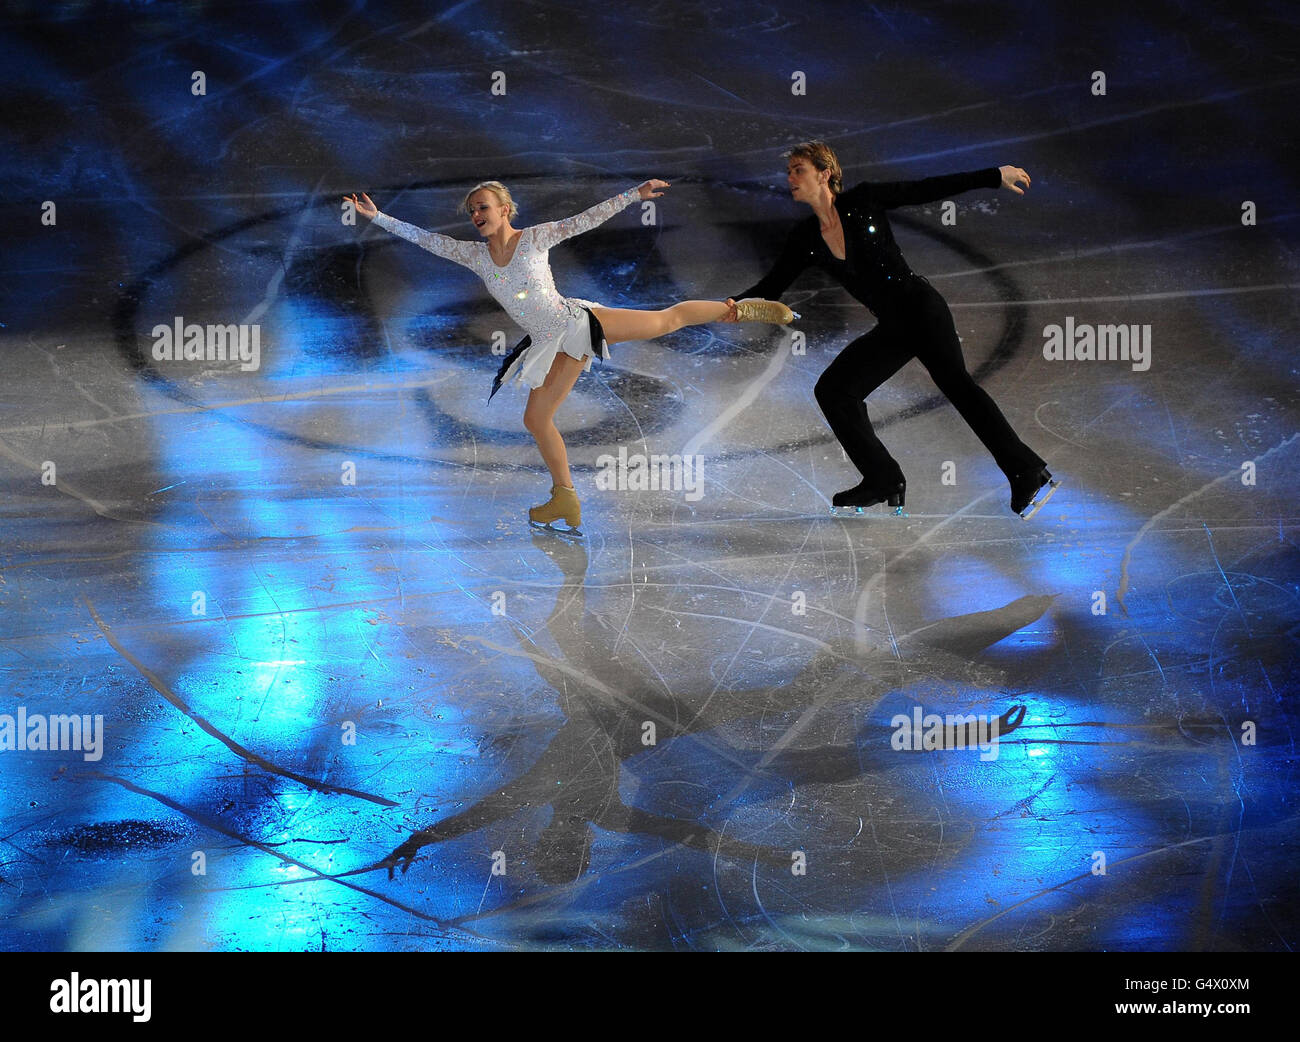 Great Britain's Penny Coomes and Nicholas Buckland in action during the Gala Exhibition during the European Figure Skating Championships at the Motorpoint Arena, Sheffield. Stock Photo